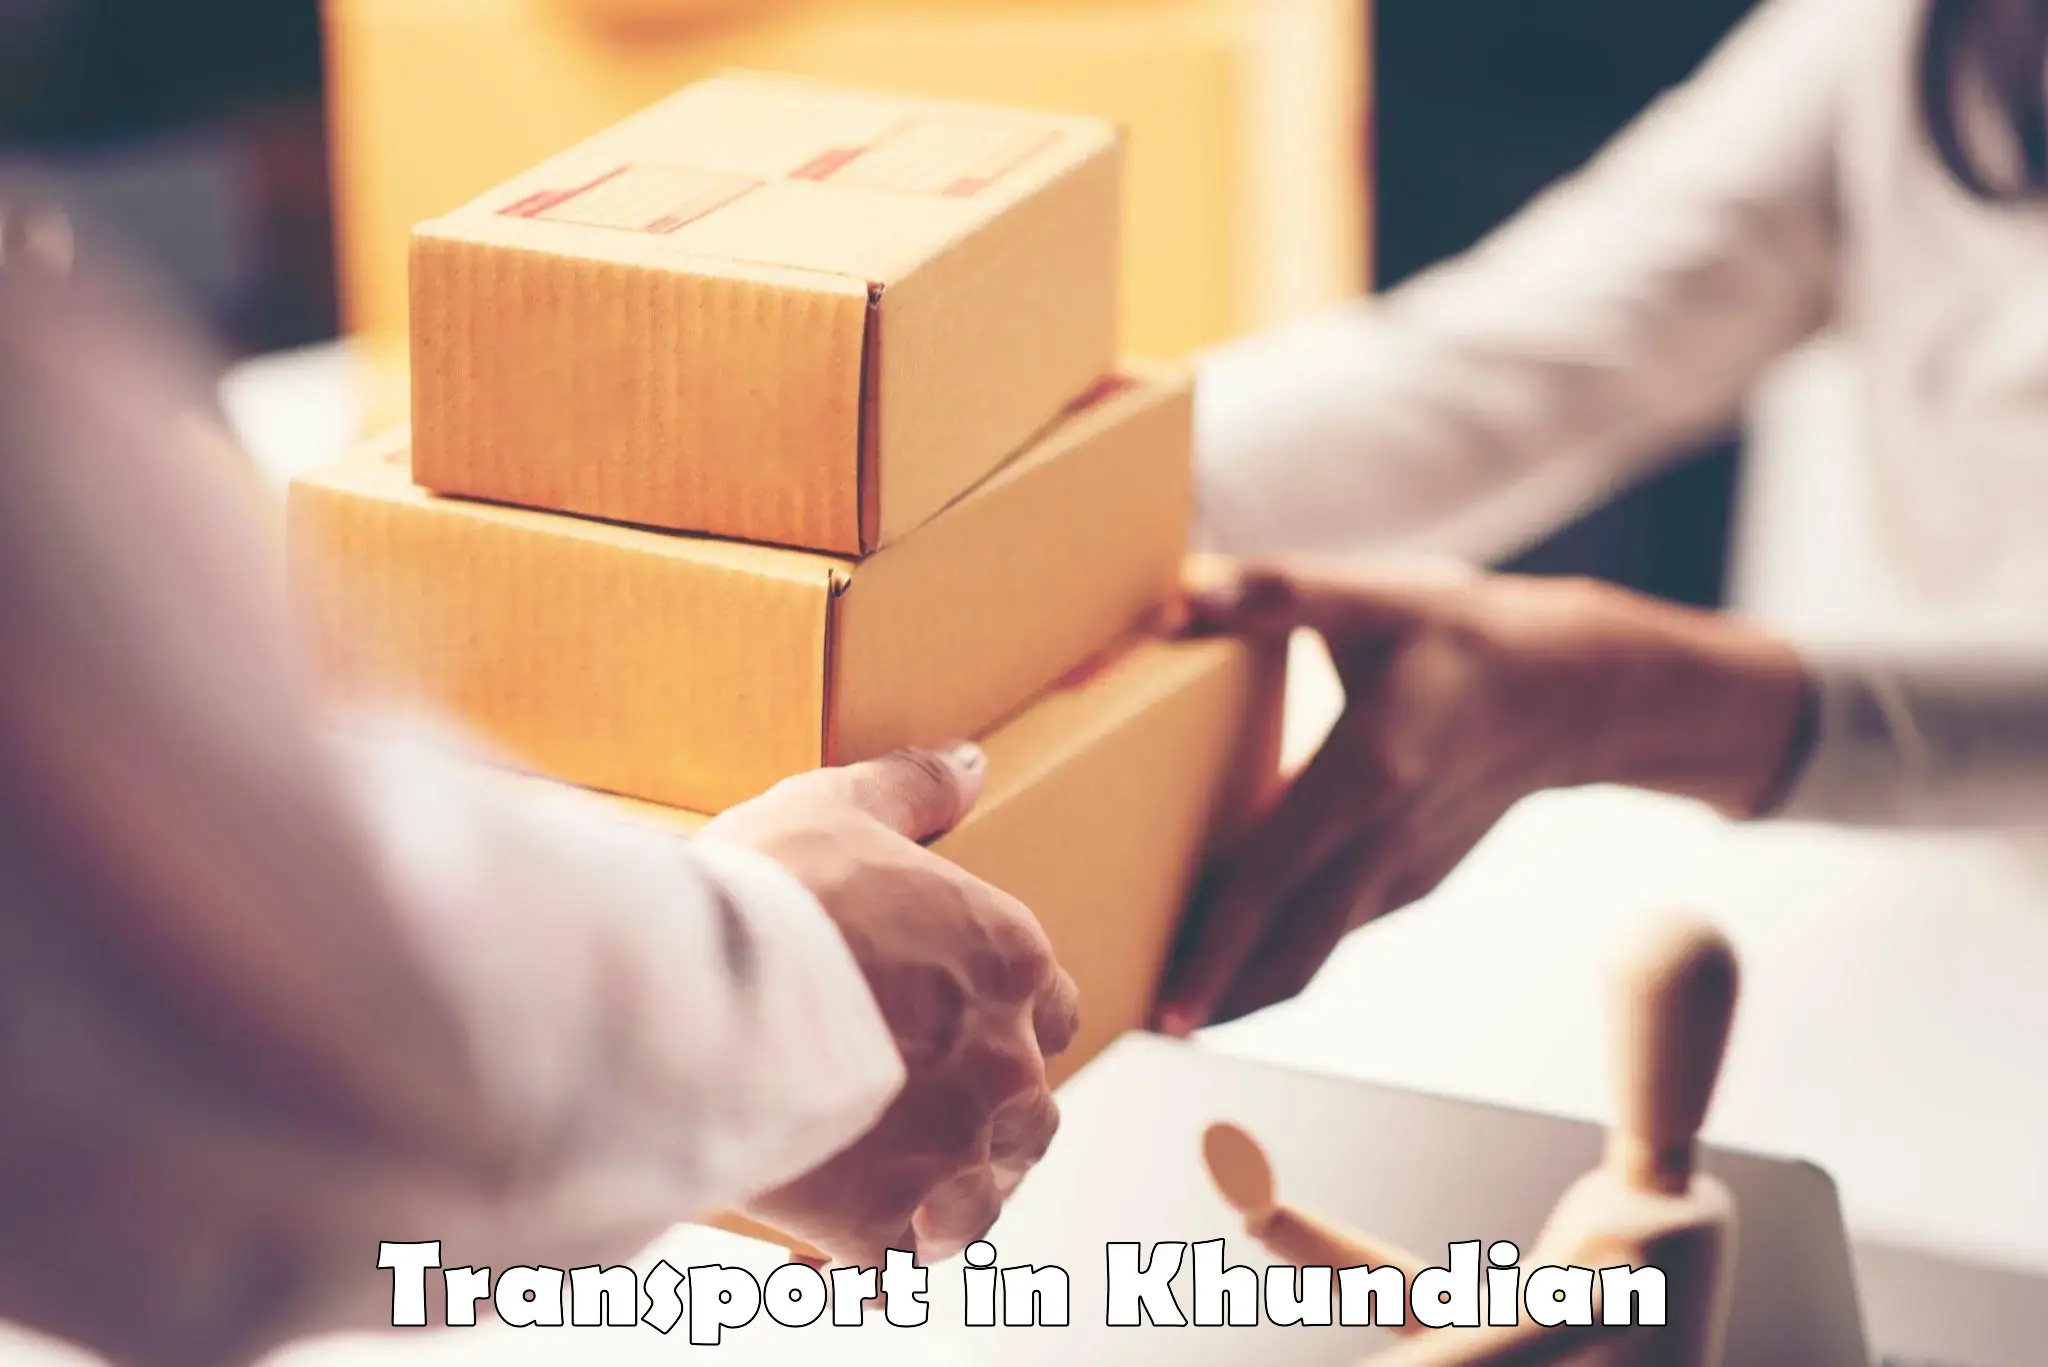 All India transport service in Khundian